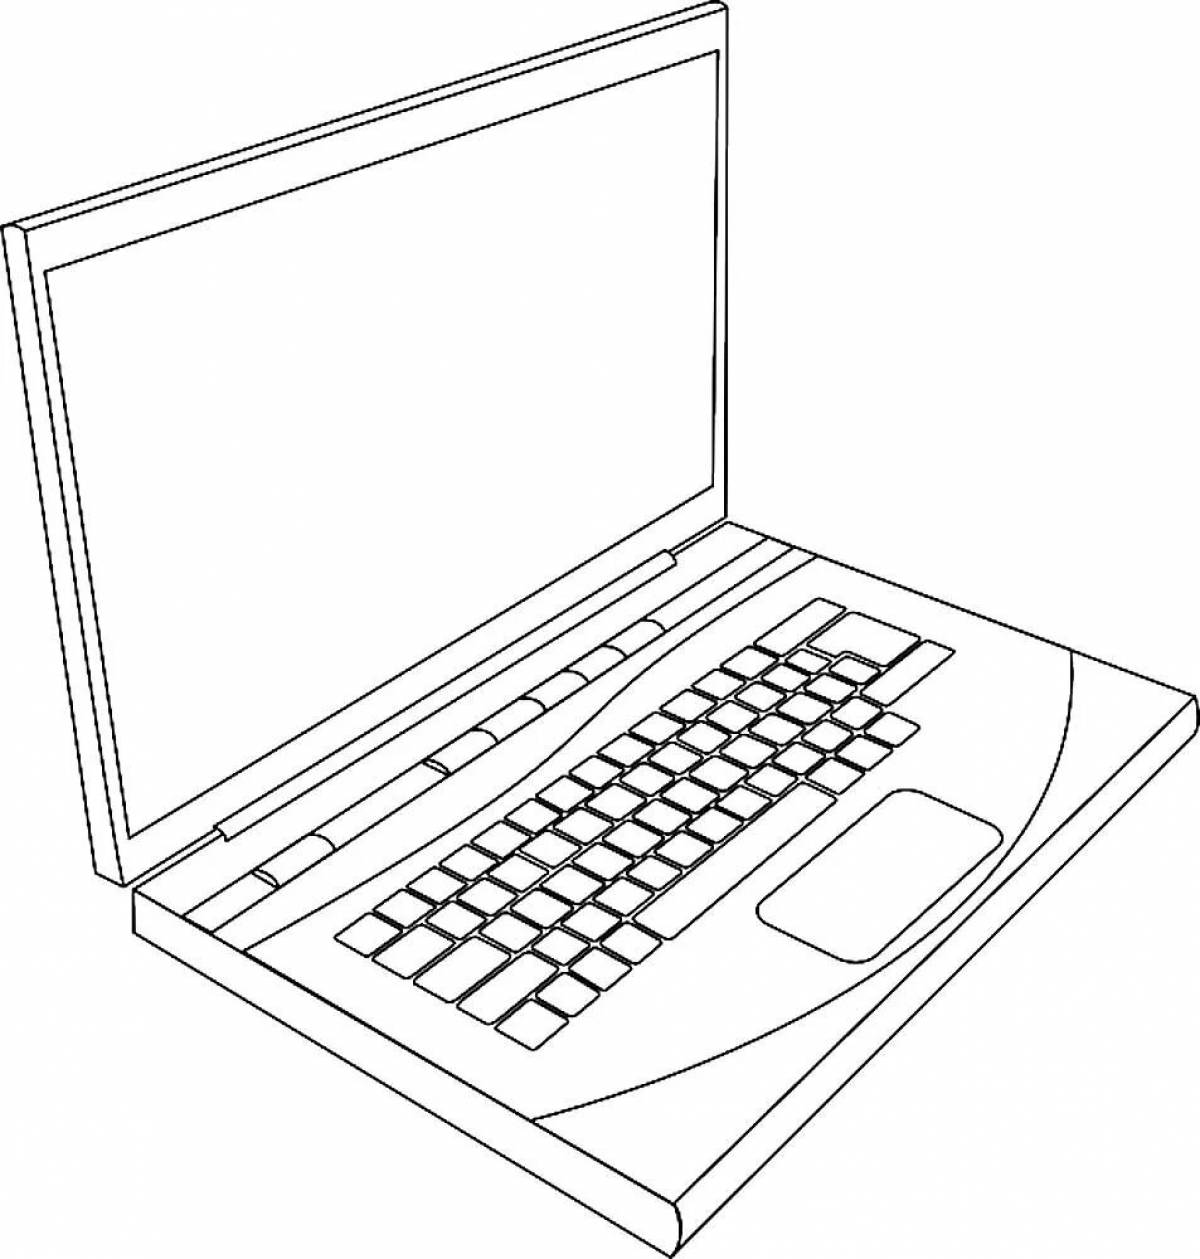 Coloring book for computer and phone